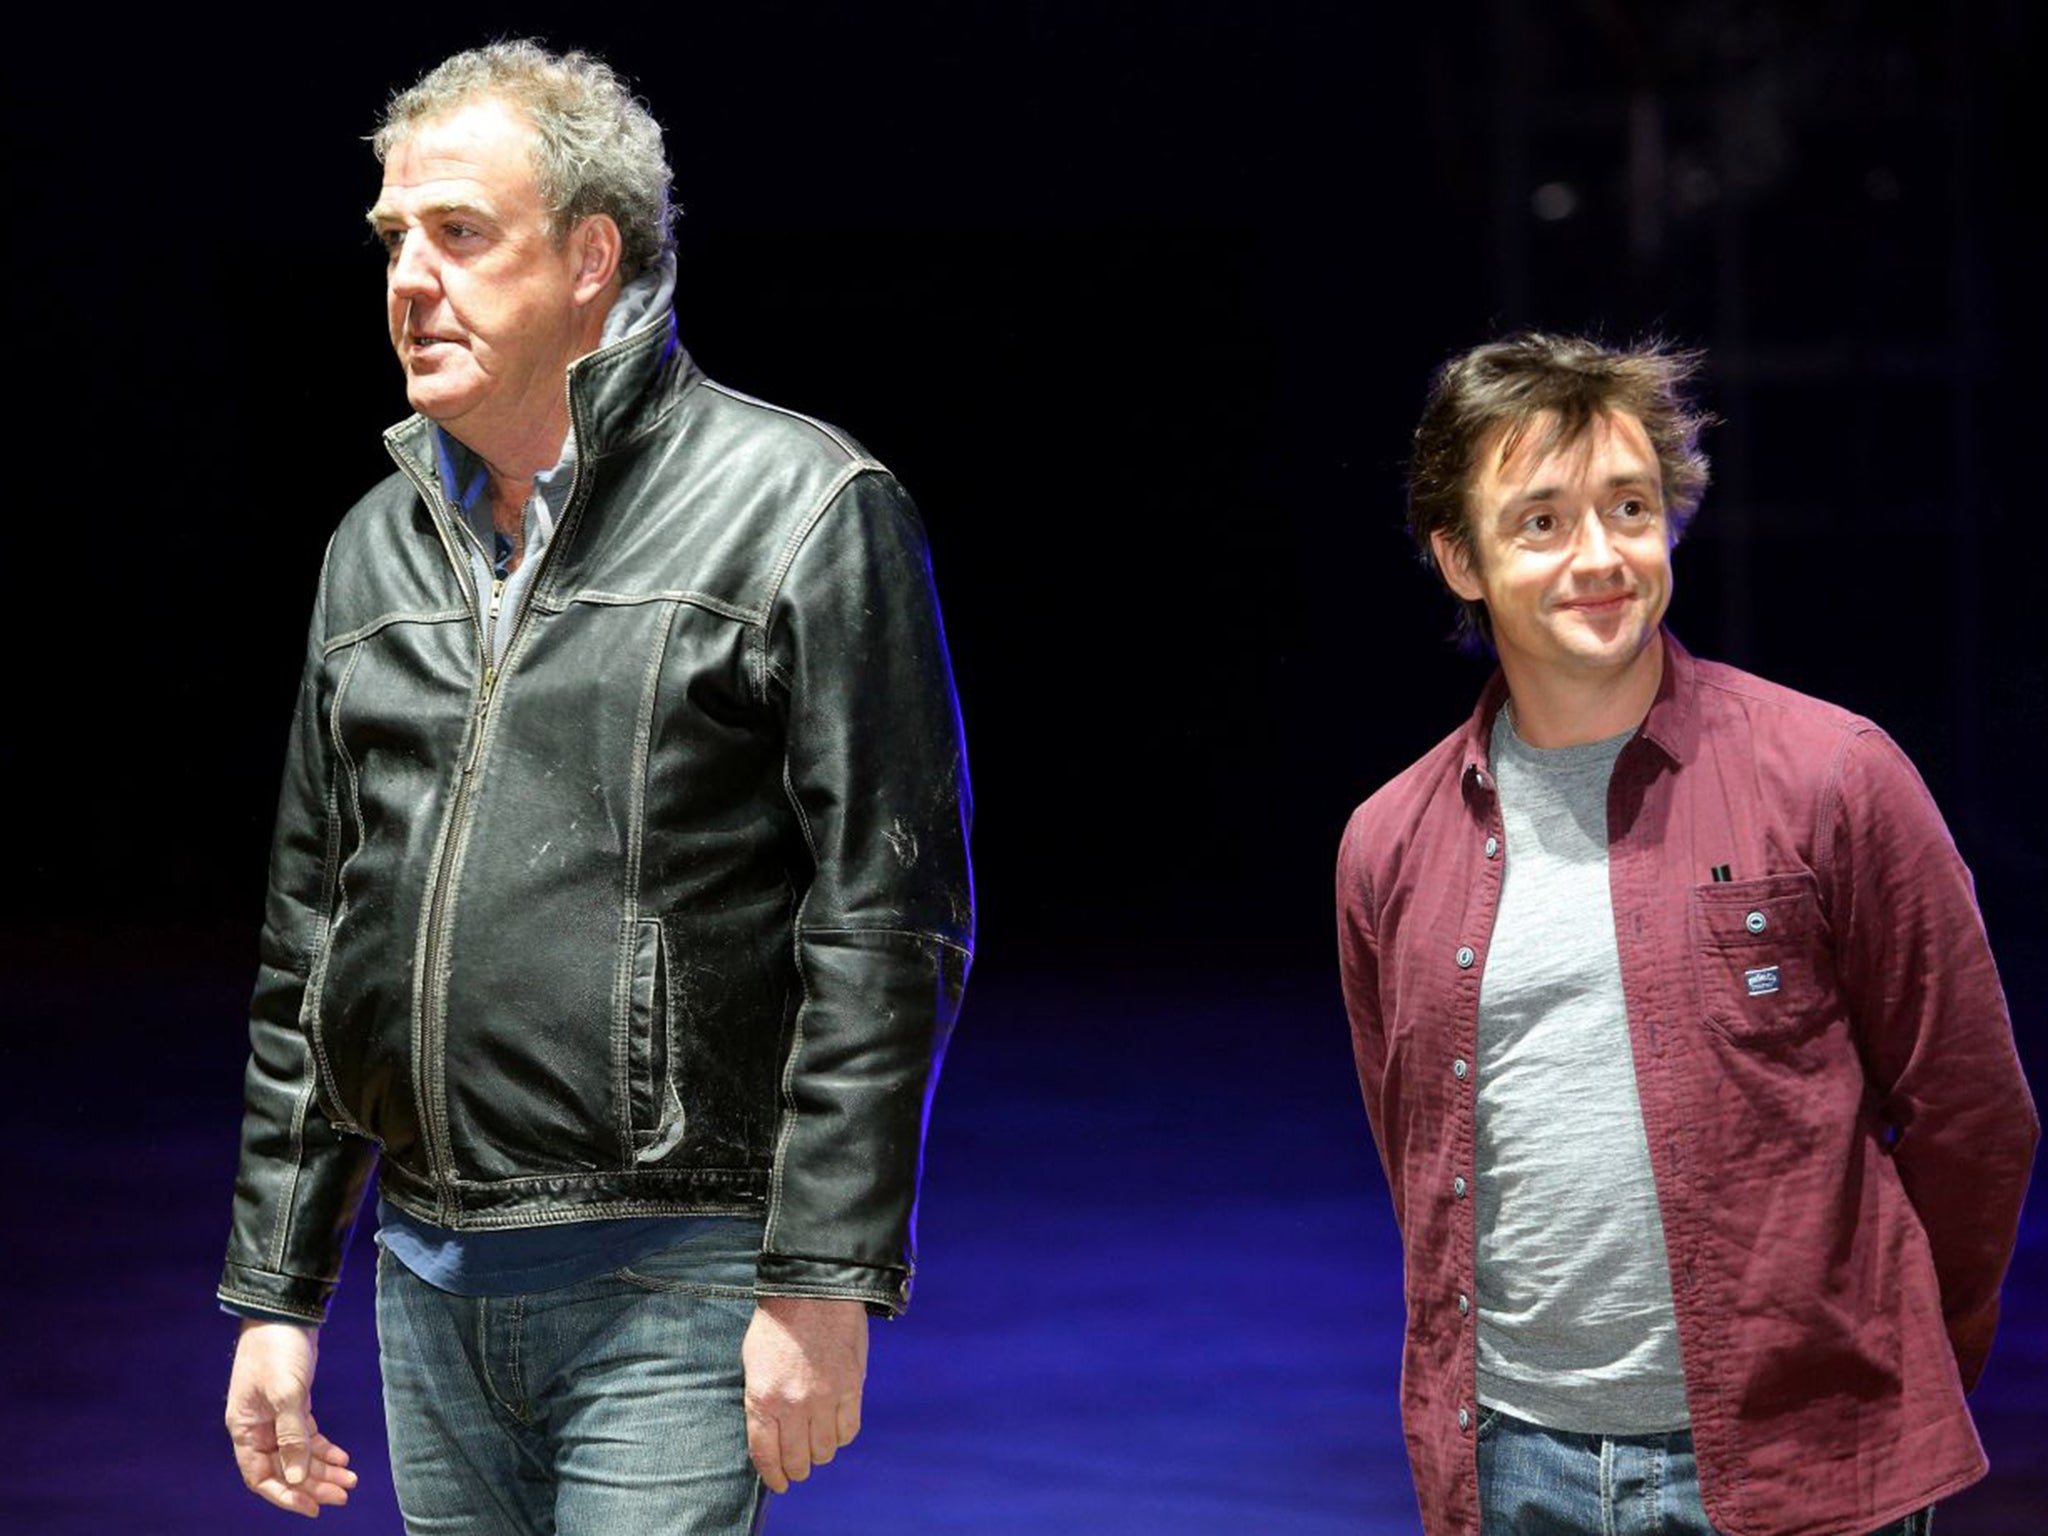 ‘Top Gear’ presenter Richard Hammond, seen here with Jeremy Clarkson, has referred to himself as a ‘pikey’